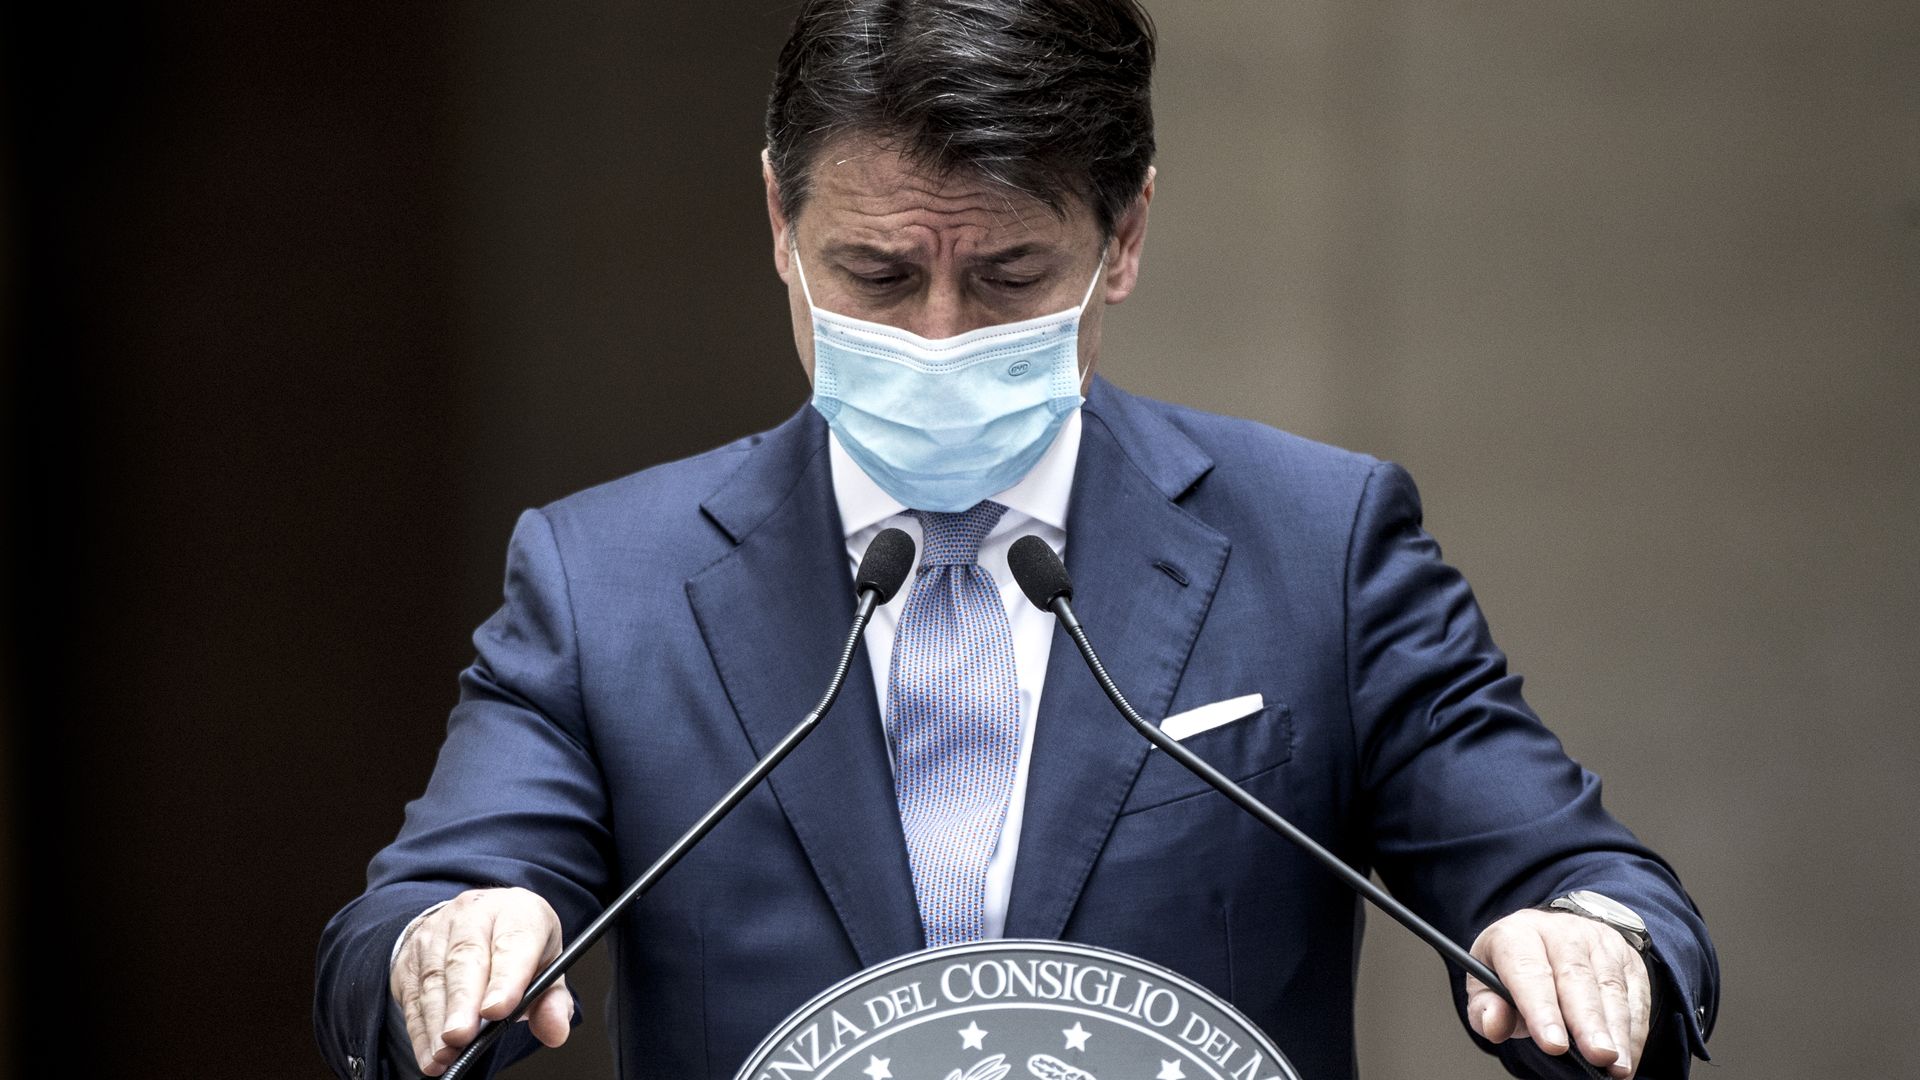 Italy's prime minister leans on a podium while wearing a face mask